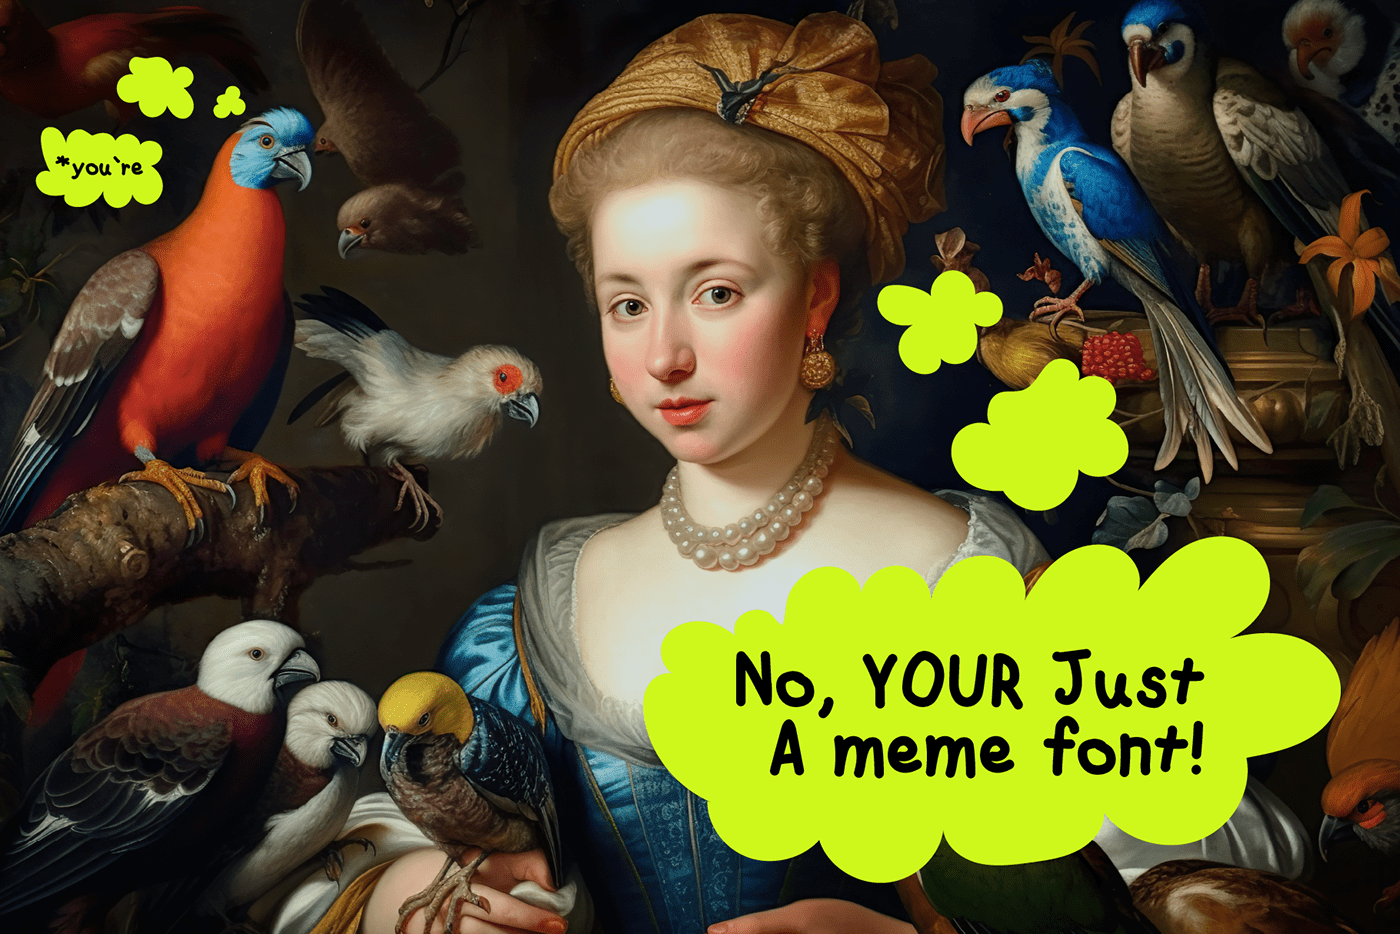 a baroque woman says "No, Your a Joke Font!" then a parrot corrects her spelling of "you're"